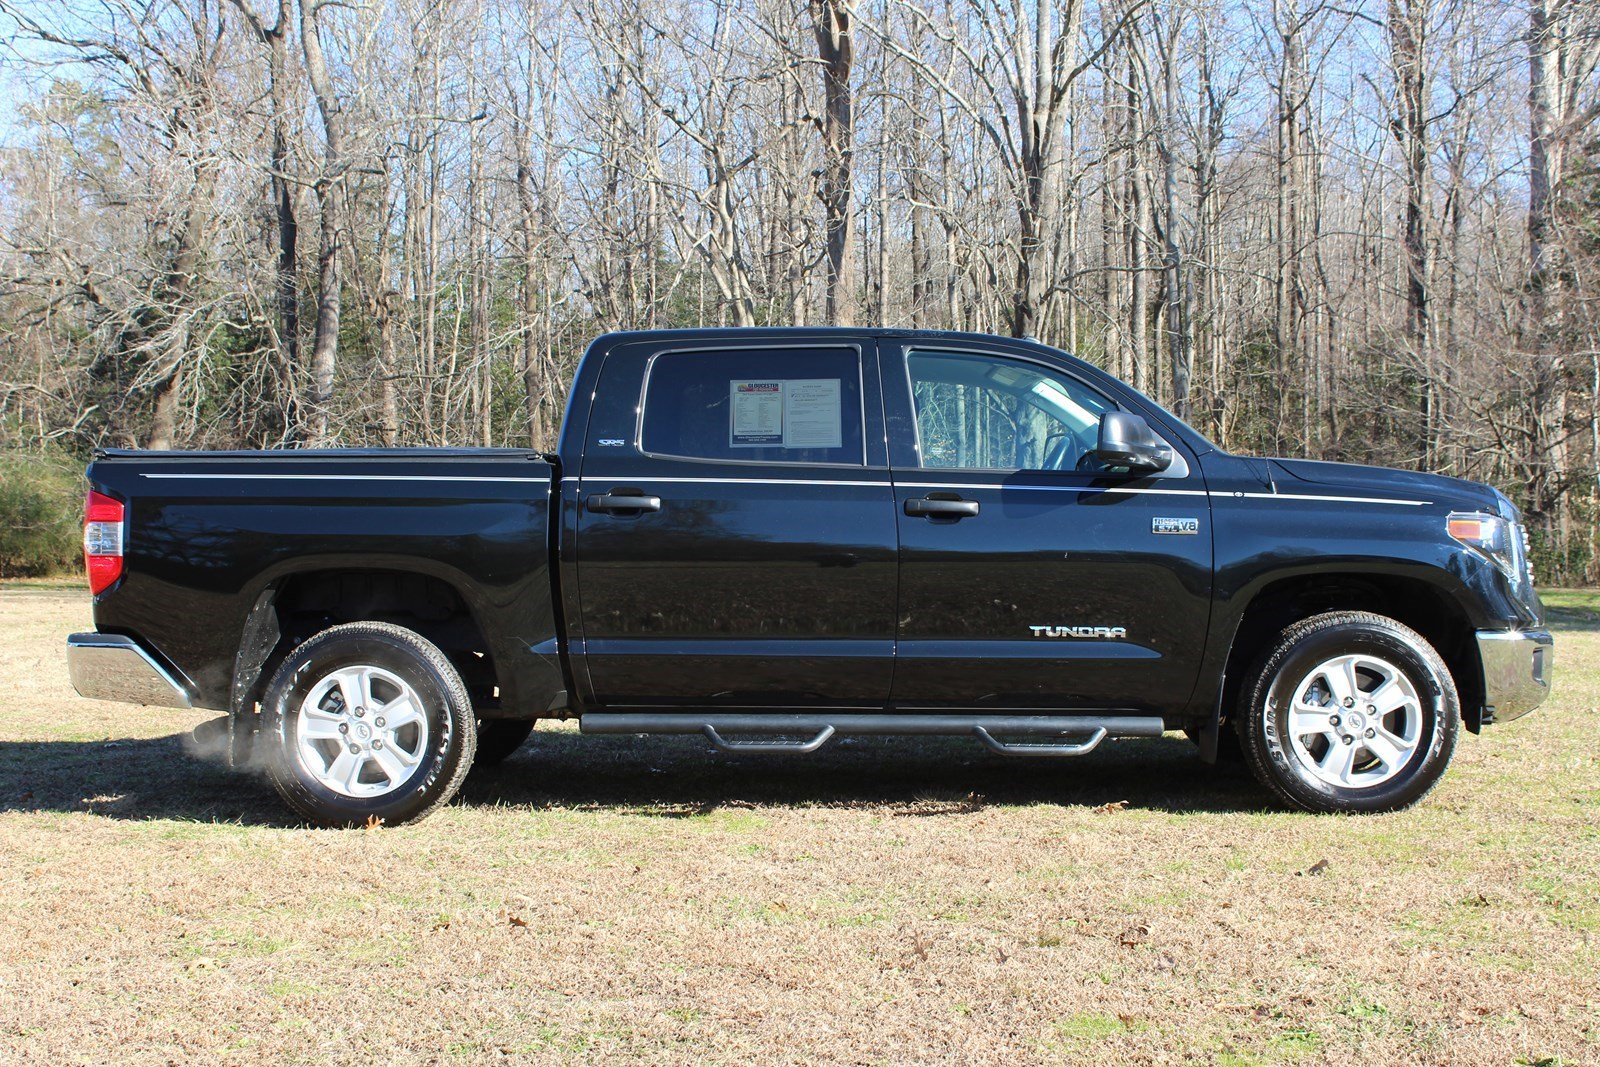 Pre-Owned 2019 Toyota Tundra 4WD SR5 Crew Cab Pickup in Gloucester #